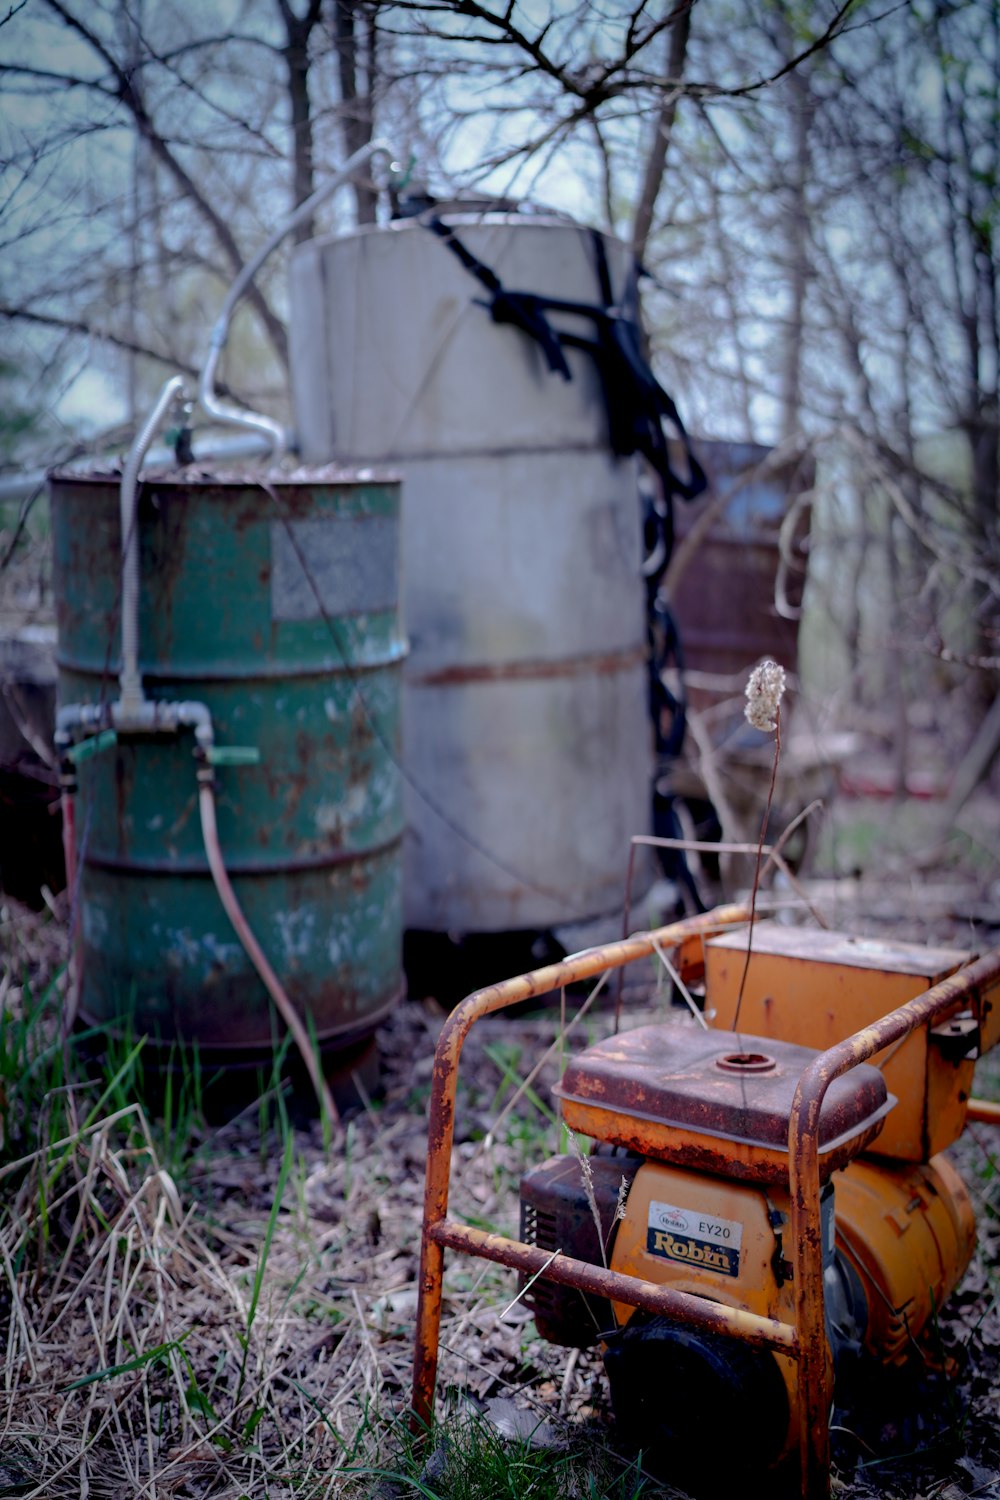 a rusted out lawn mower sitting in the middle of a forest